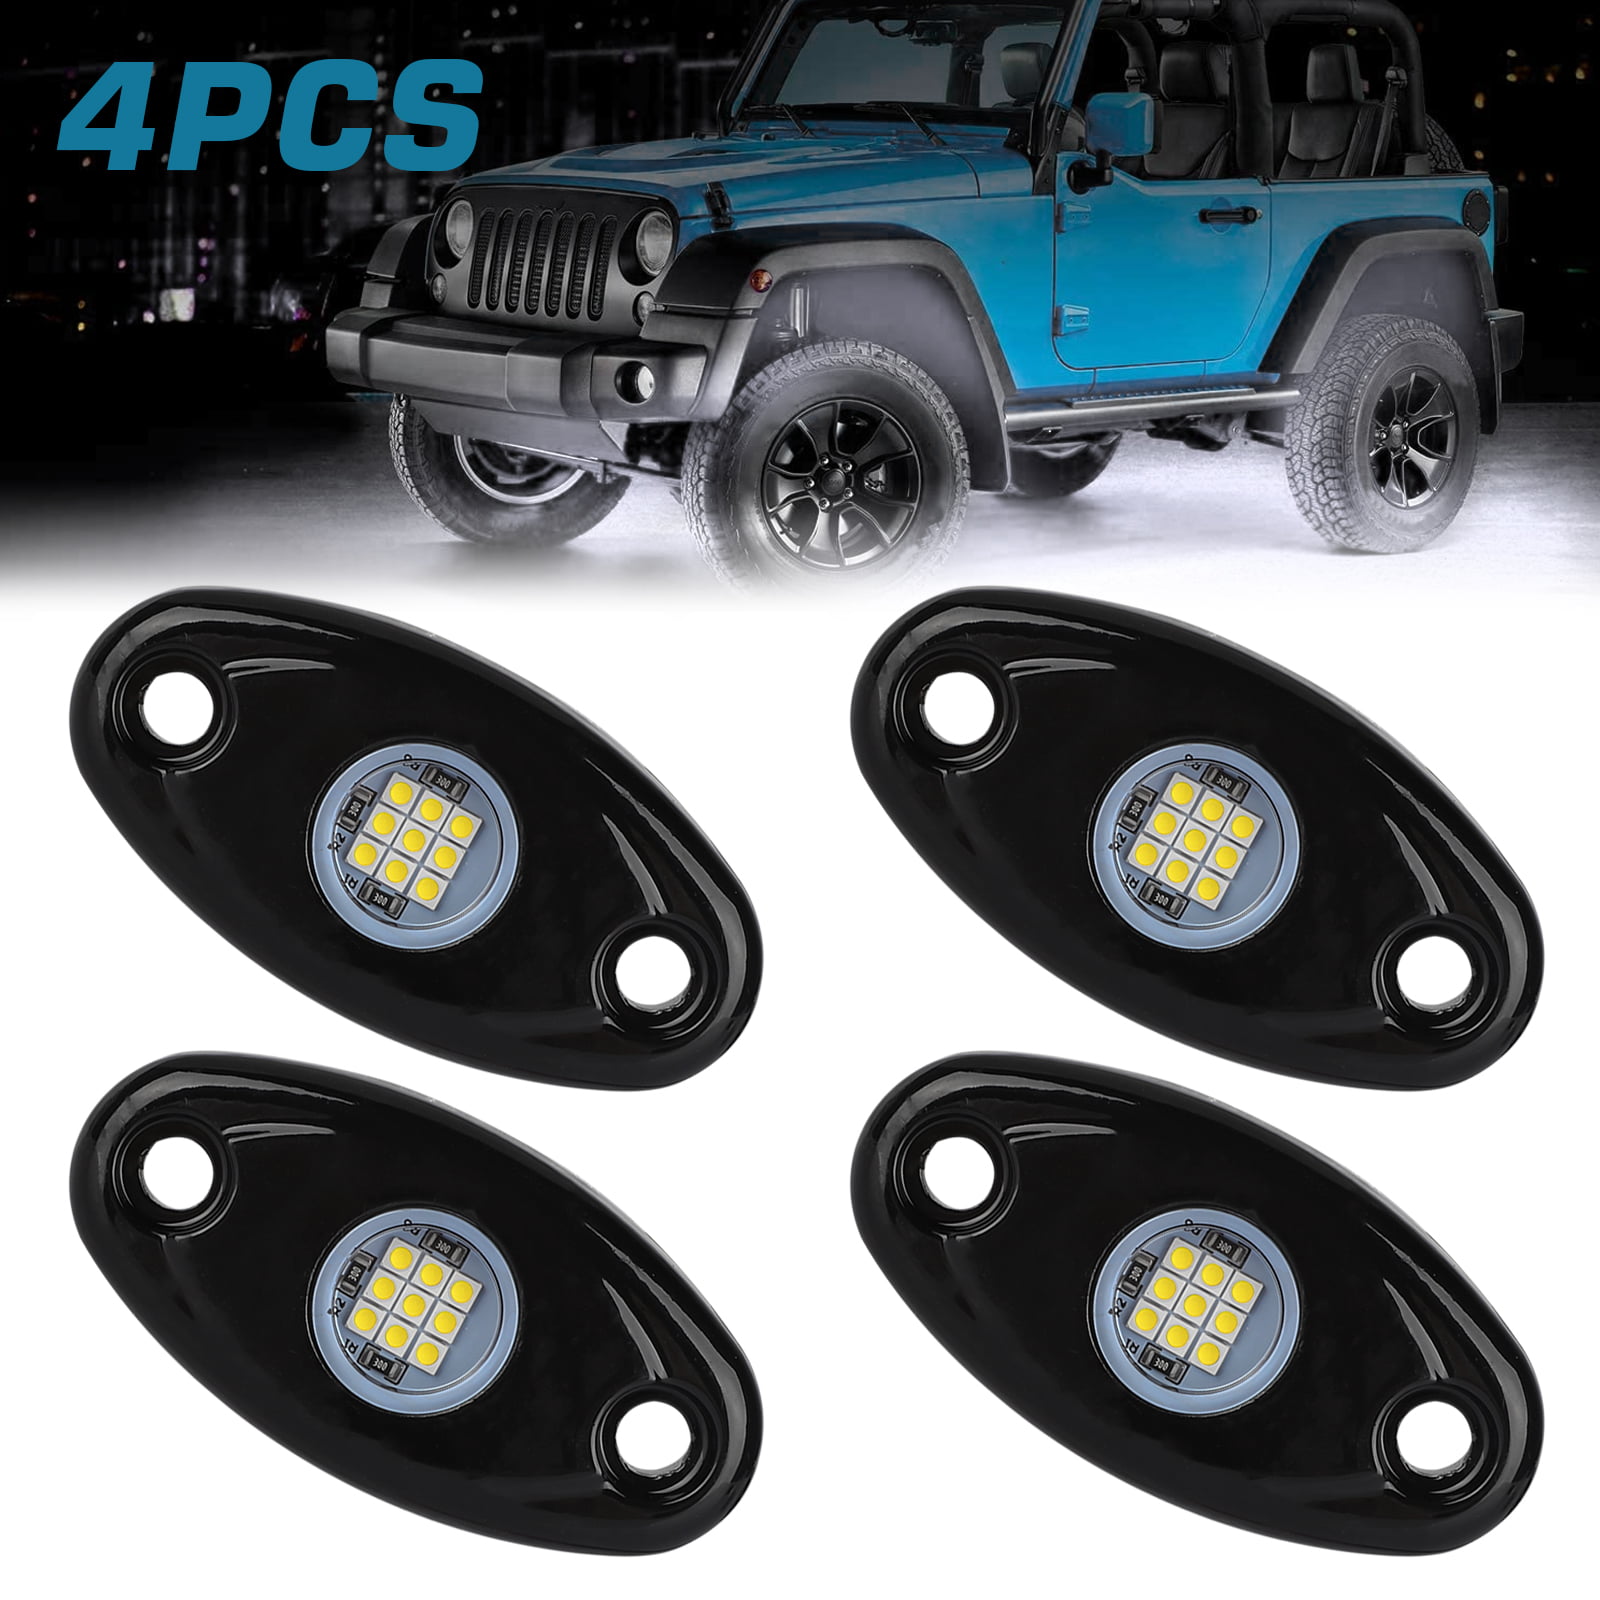 4 Pods LED Rock Lights Green Waterproof LED Neon Underglow Light For Truck SUV ATV Jeep Off-Road Car Chassis Light Atmosphere Decorative Light 